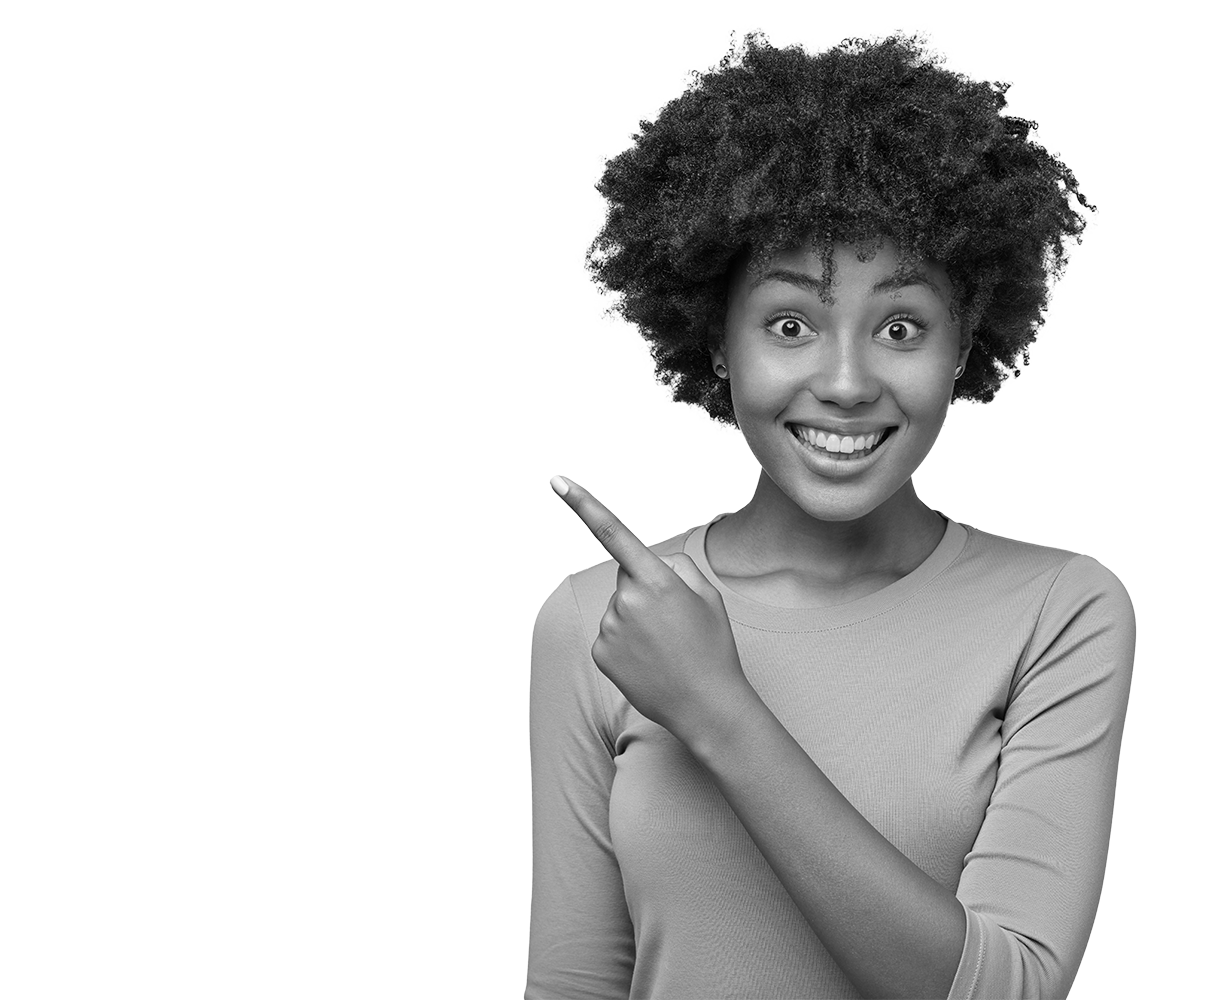 horizontal-shot-pretty-dark-skinned-woman-with-afro-hairstyle-has-broad-smile-white-teeth-shows-something-nice-friend-points-upper-right-corner-stands-against-wall